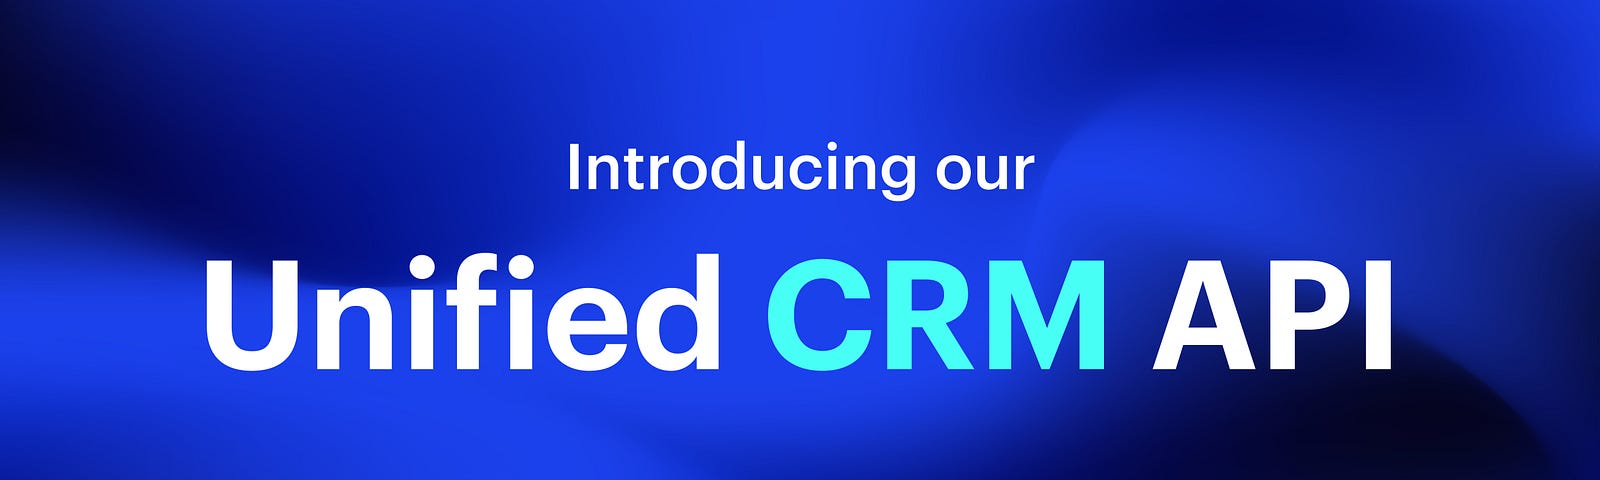 Introducing our Unified CRM API